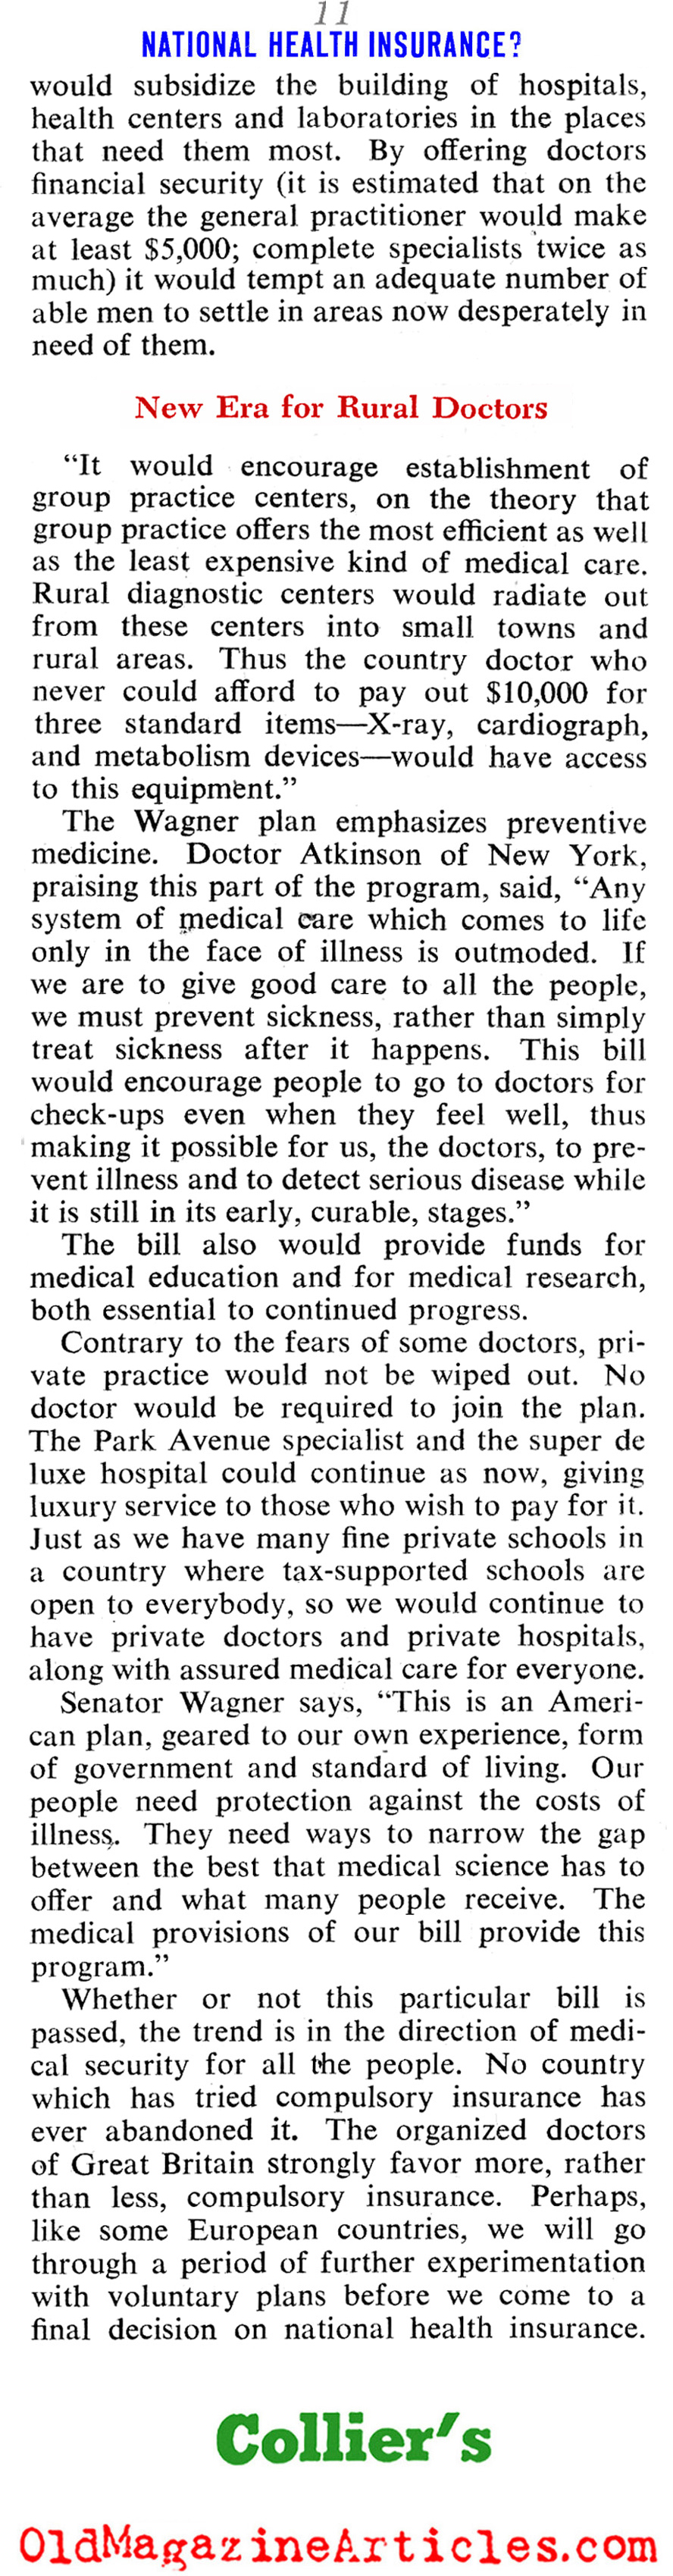 Weighing the Pros and Cons of Socialized Medicine (Collier's Magazine, 1945)